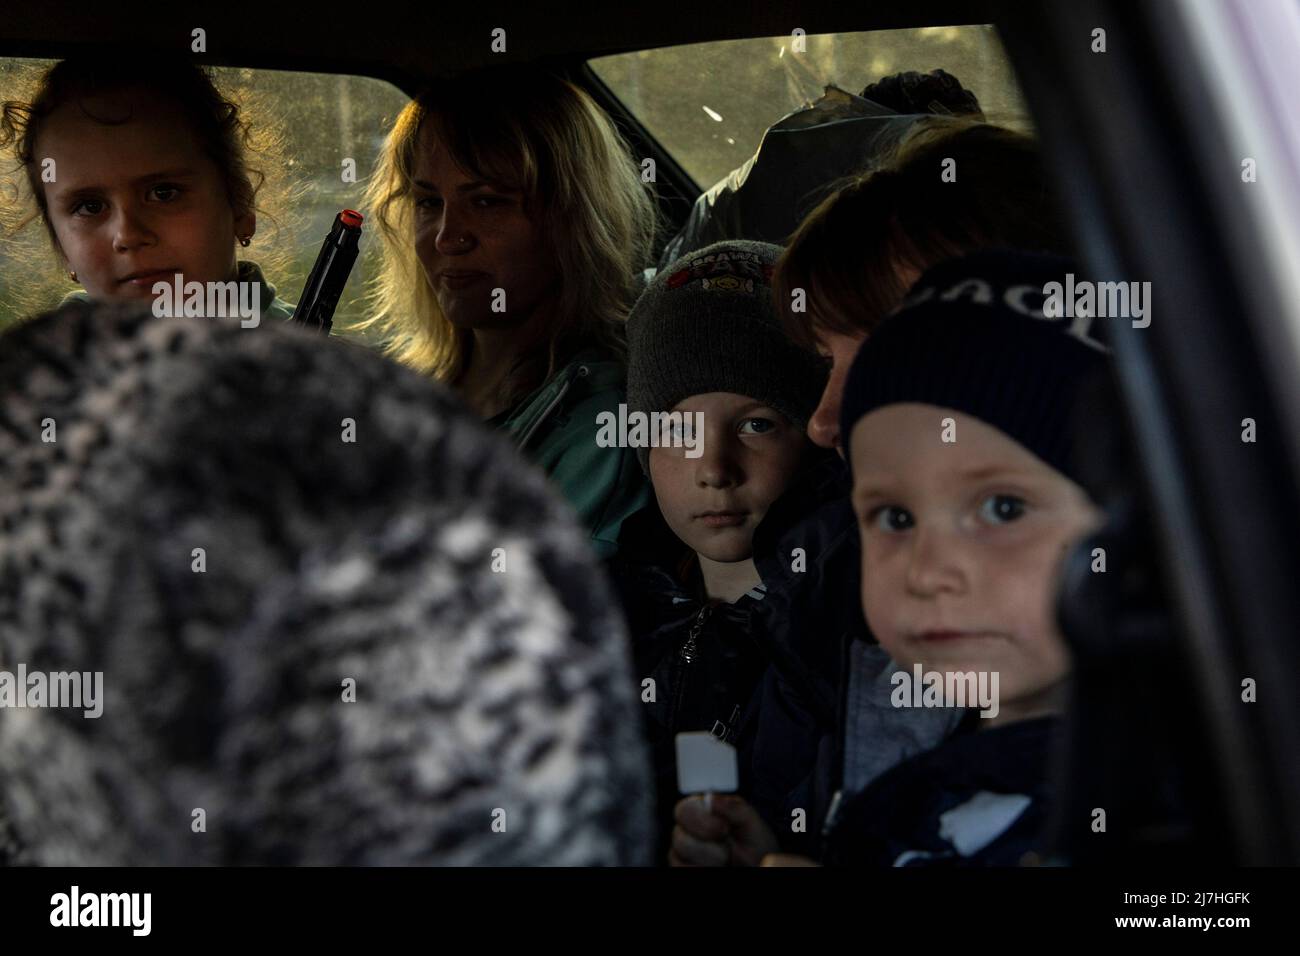 Sophia (L1, 7), Igor (L3, 8) Sergei (L4, 2.5) are seen packed in the car with their parents as they depart to other cities after arriving in Zaporizhia from Kherson on Sunday. Amid the intensified war crisis in Southeast Ukraine, millions of Ukrainian families have now been evacuated from the war zones and Russia controlled territories to Ukraine controlled territories, Zaporizhia.According to the United Nations, more than 11 million people are believed to have fled their homes in Ukraine since the conflict began, with 7.7 million people displaced inside their homeland. Stock Photo